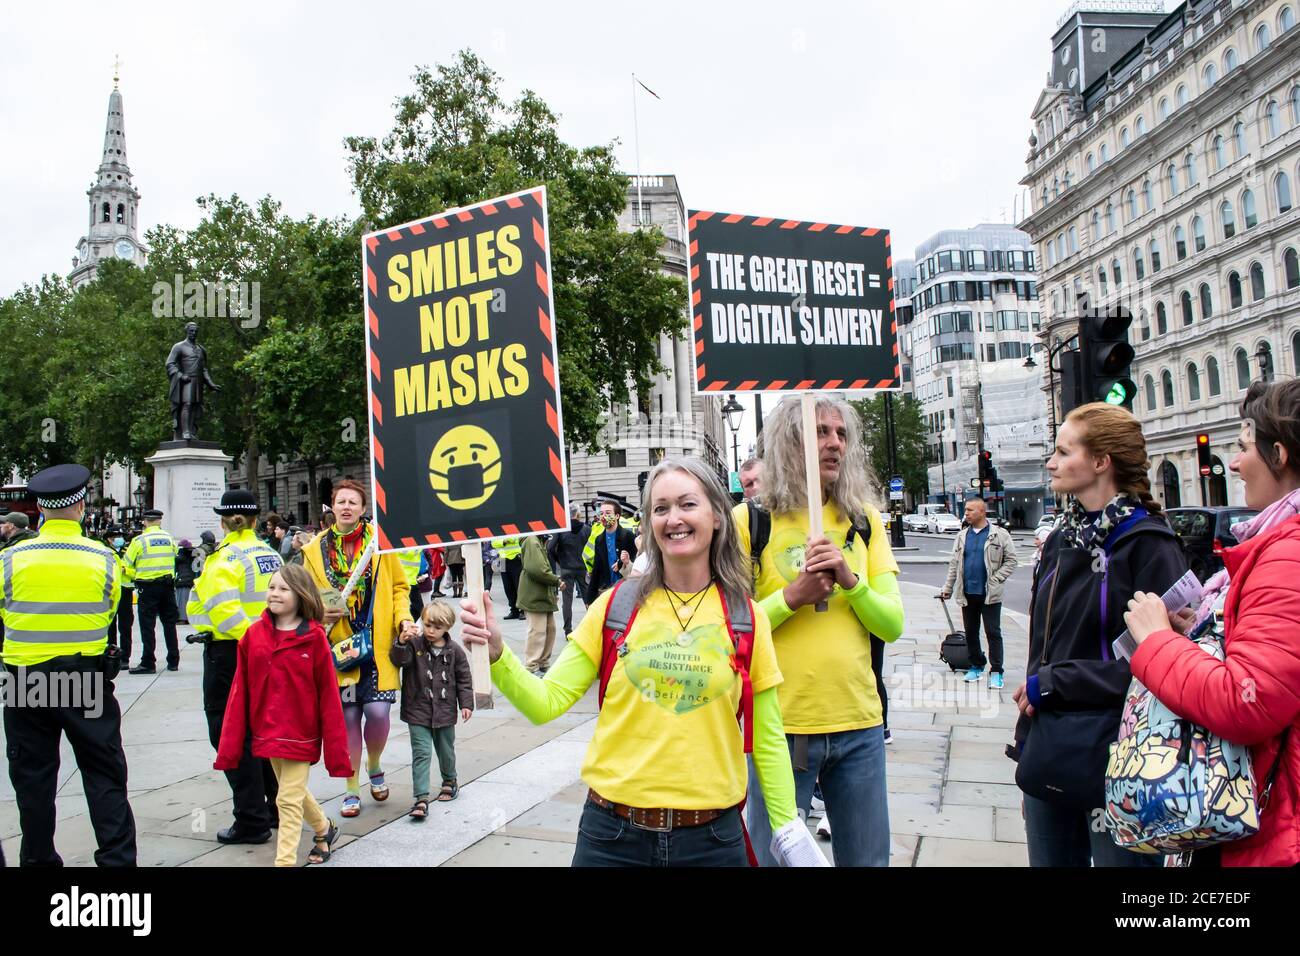 WESTMINSTER, LONDON/ENGLAND- 29 August 2020: Protesters at an anti-lockdown Unite for Freedom Rally, against coronavirus restrictions Stock Photo